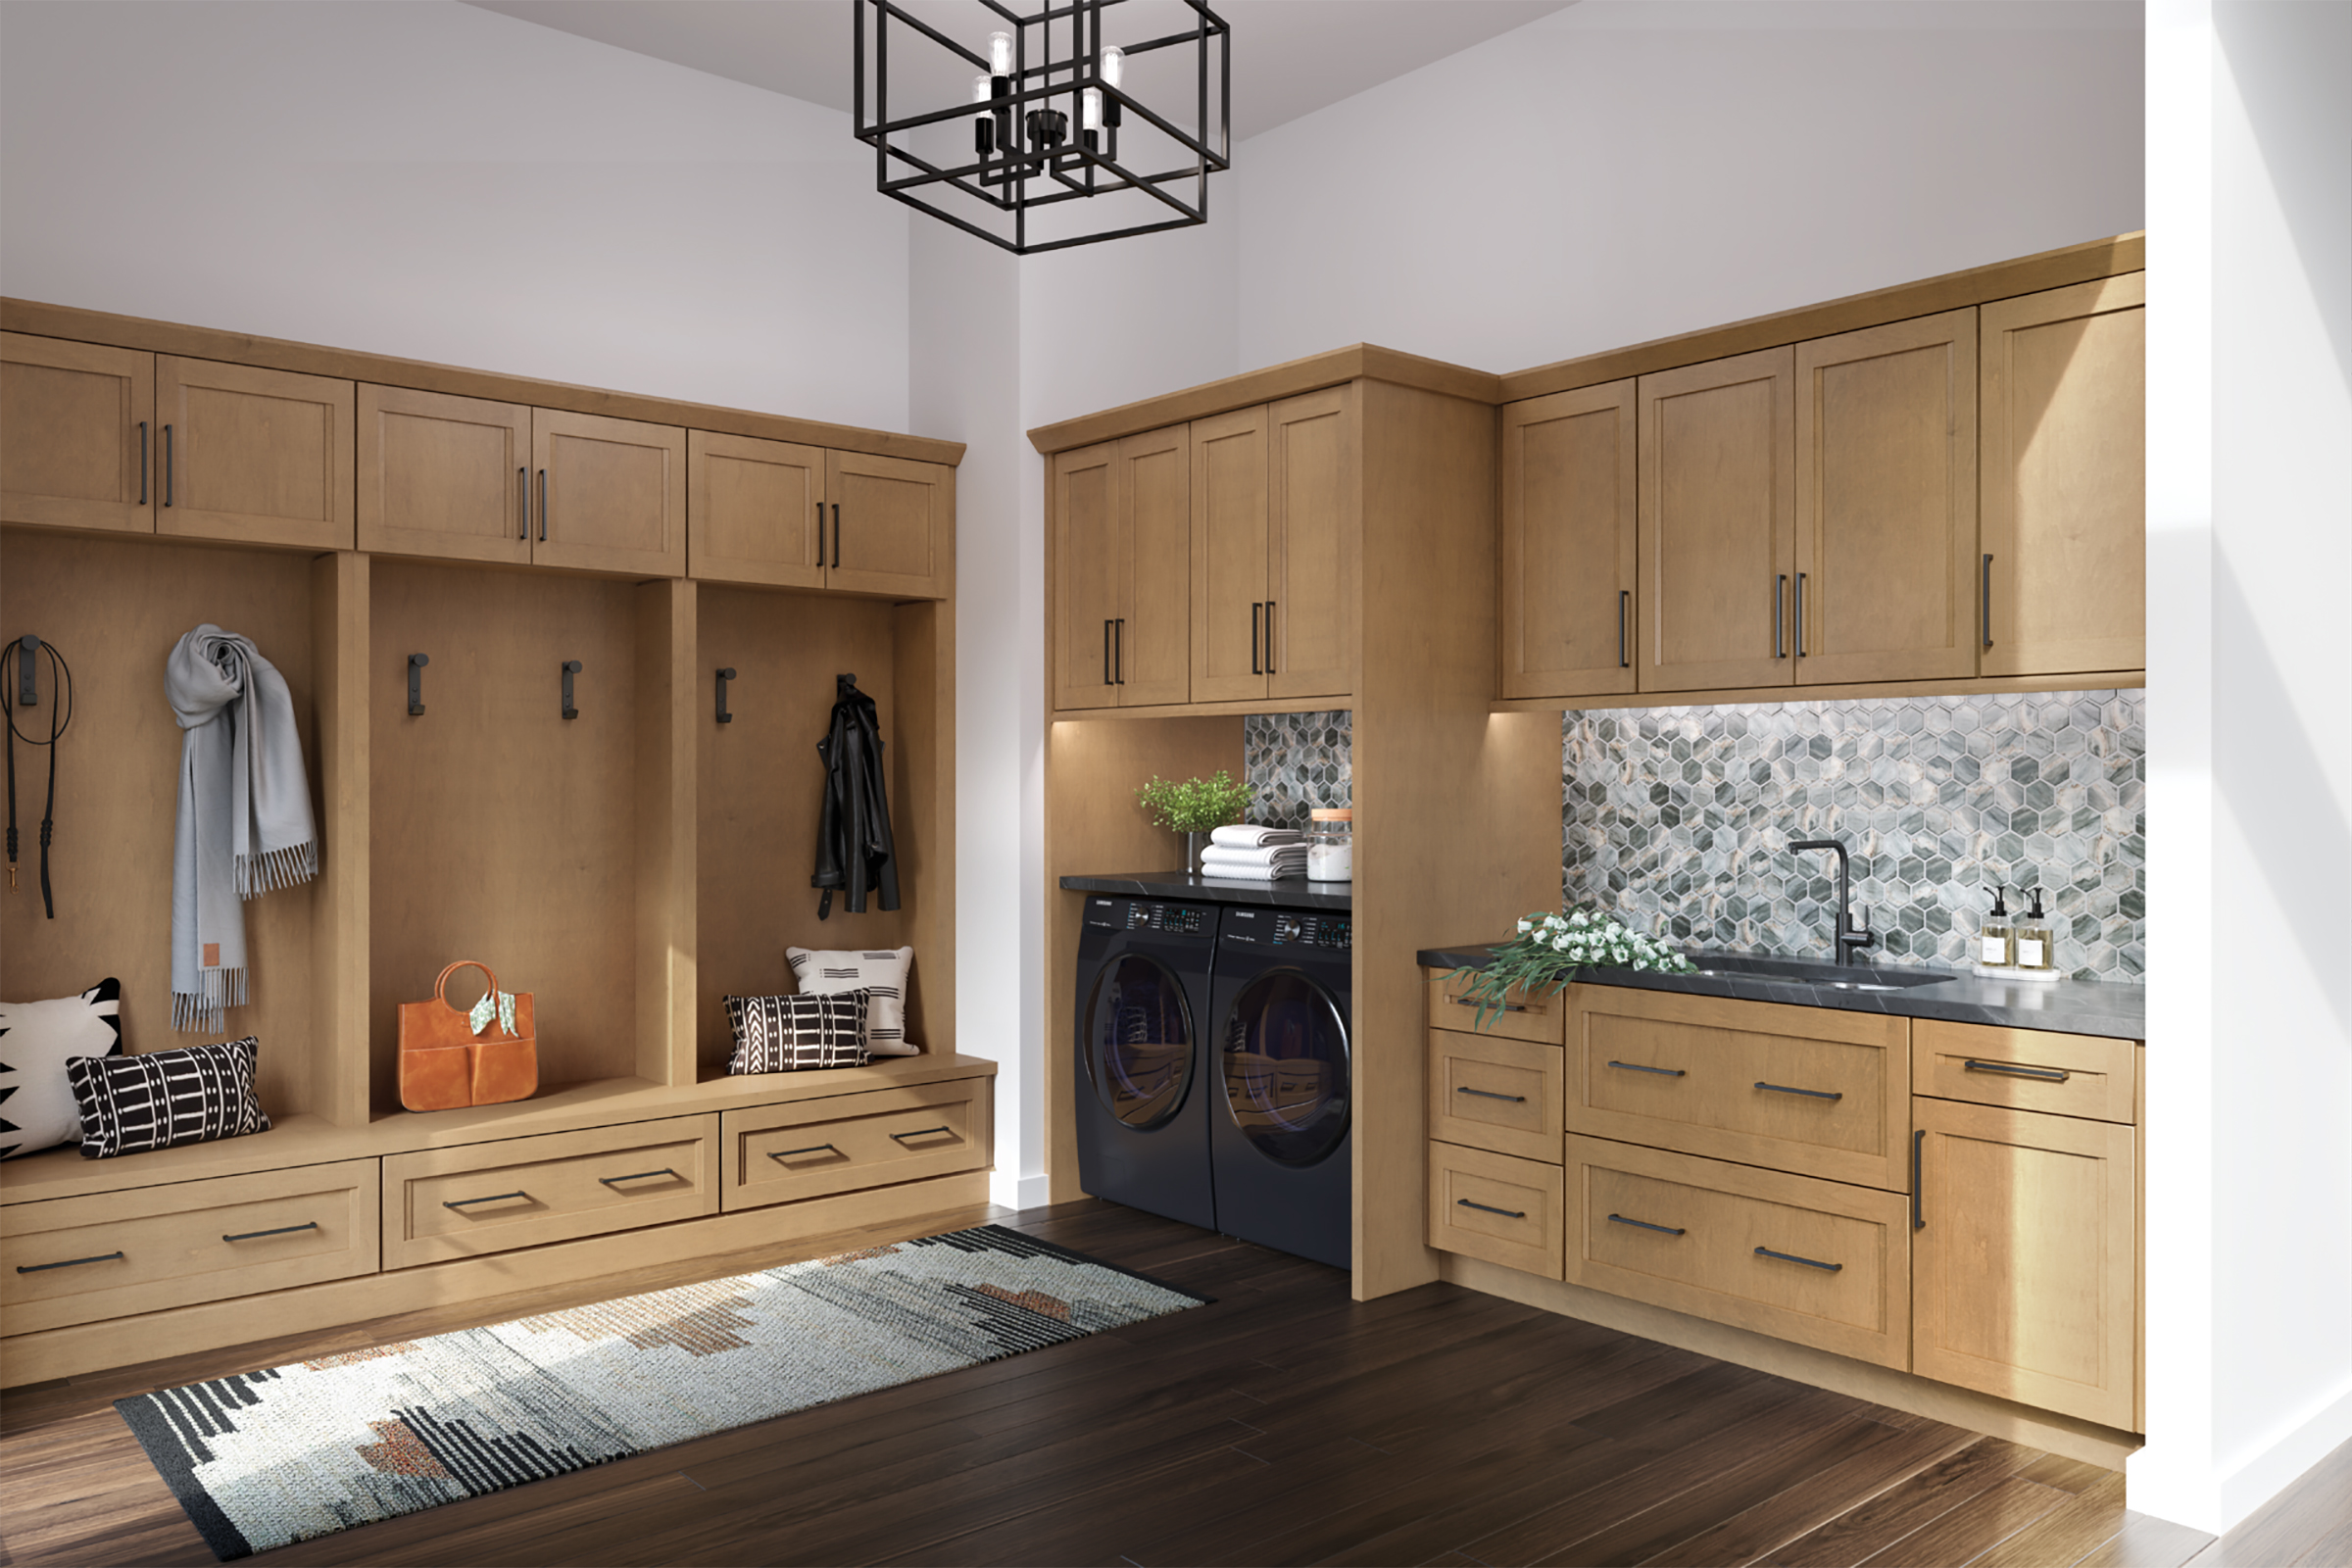 Kraftmaid Maple wood mudroom lockers with washer dryer cabinets